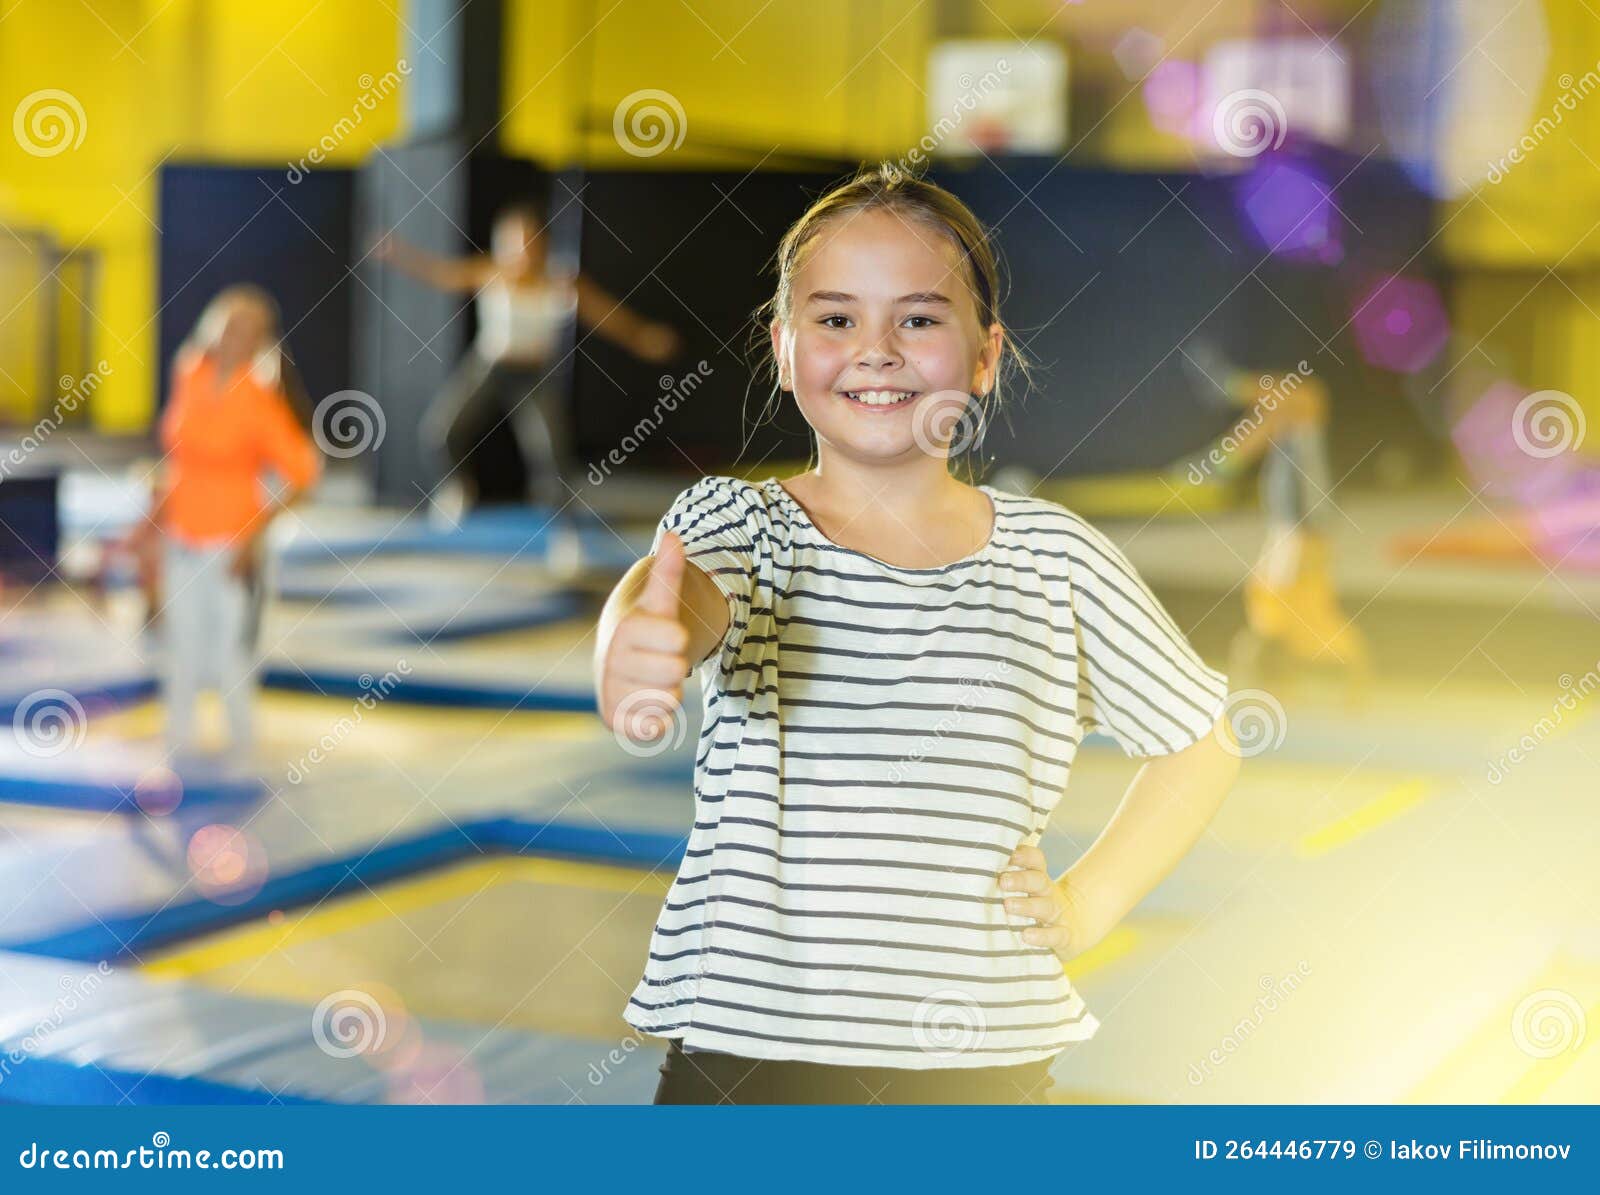 Cheerful Tween Girl Giving Thumbs Up On Trampolines In Inflatable